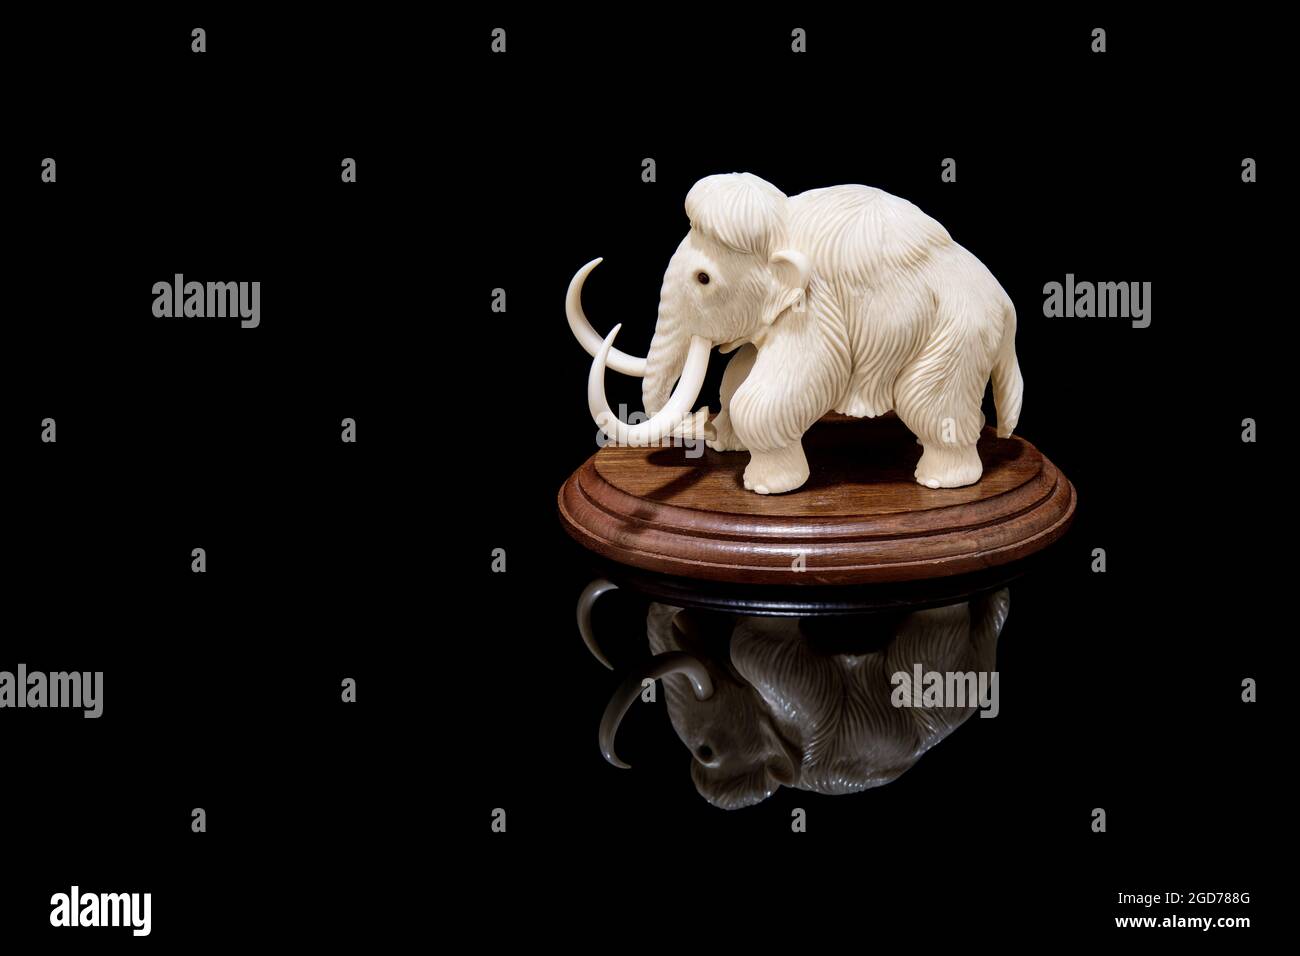 ivory statuette of elephant mammoth on black background with reflection. carved with a gouge from old bone. authentic decorative figure for interior. Stock Photo